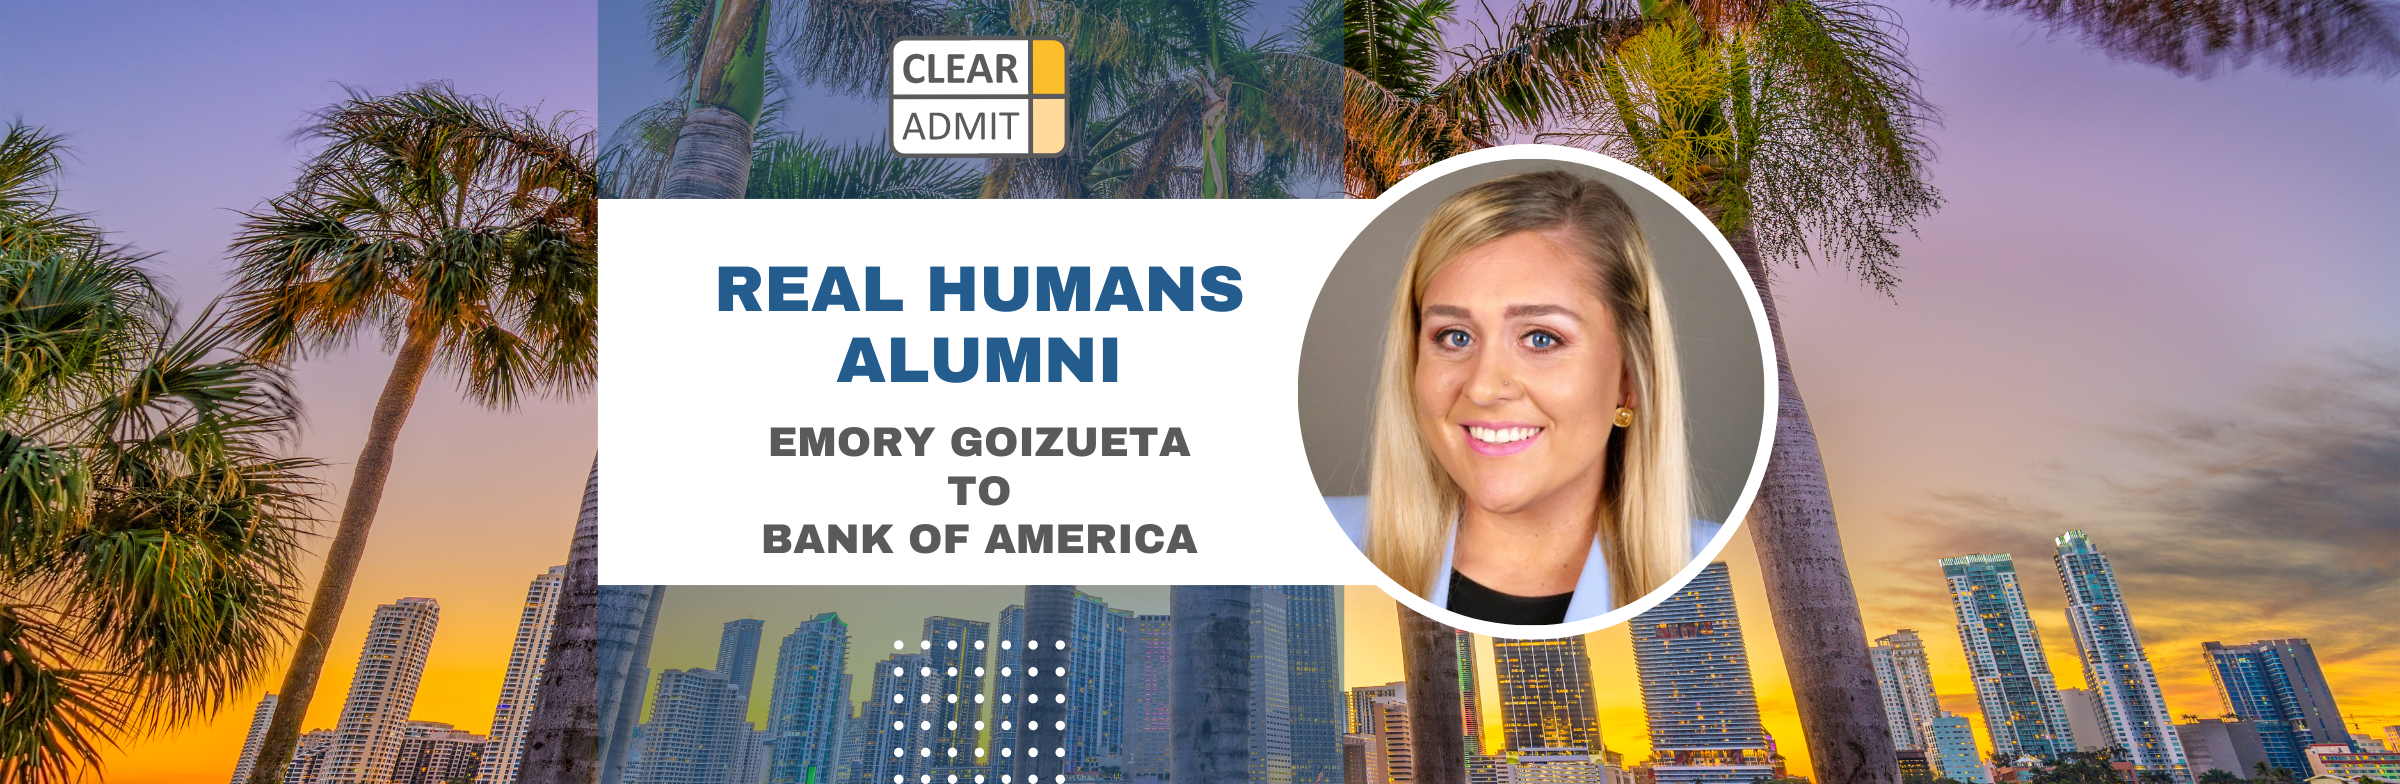 Image for Real Humans of Bank of America: Olivia Farley, Emory Goizueta MBA ’20, Vice President Investment Banking